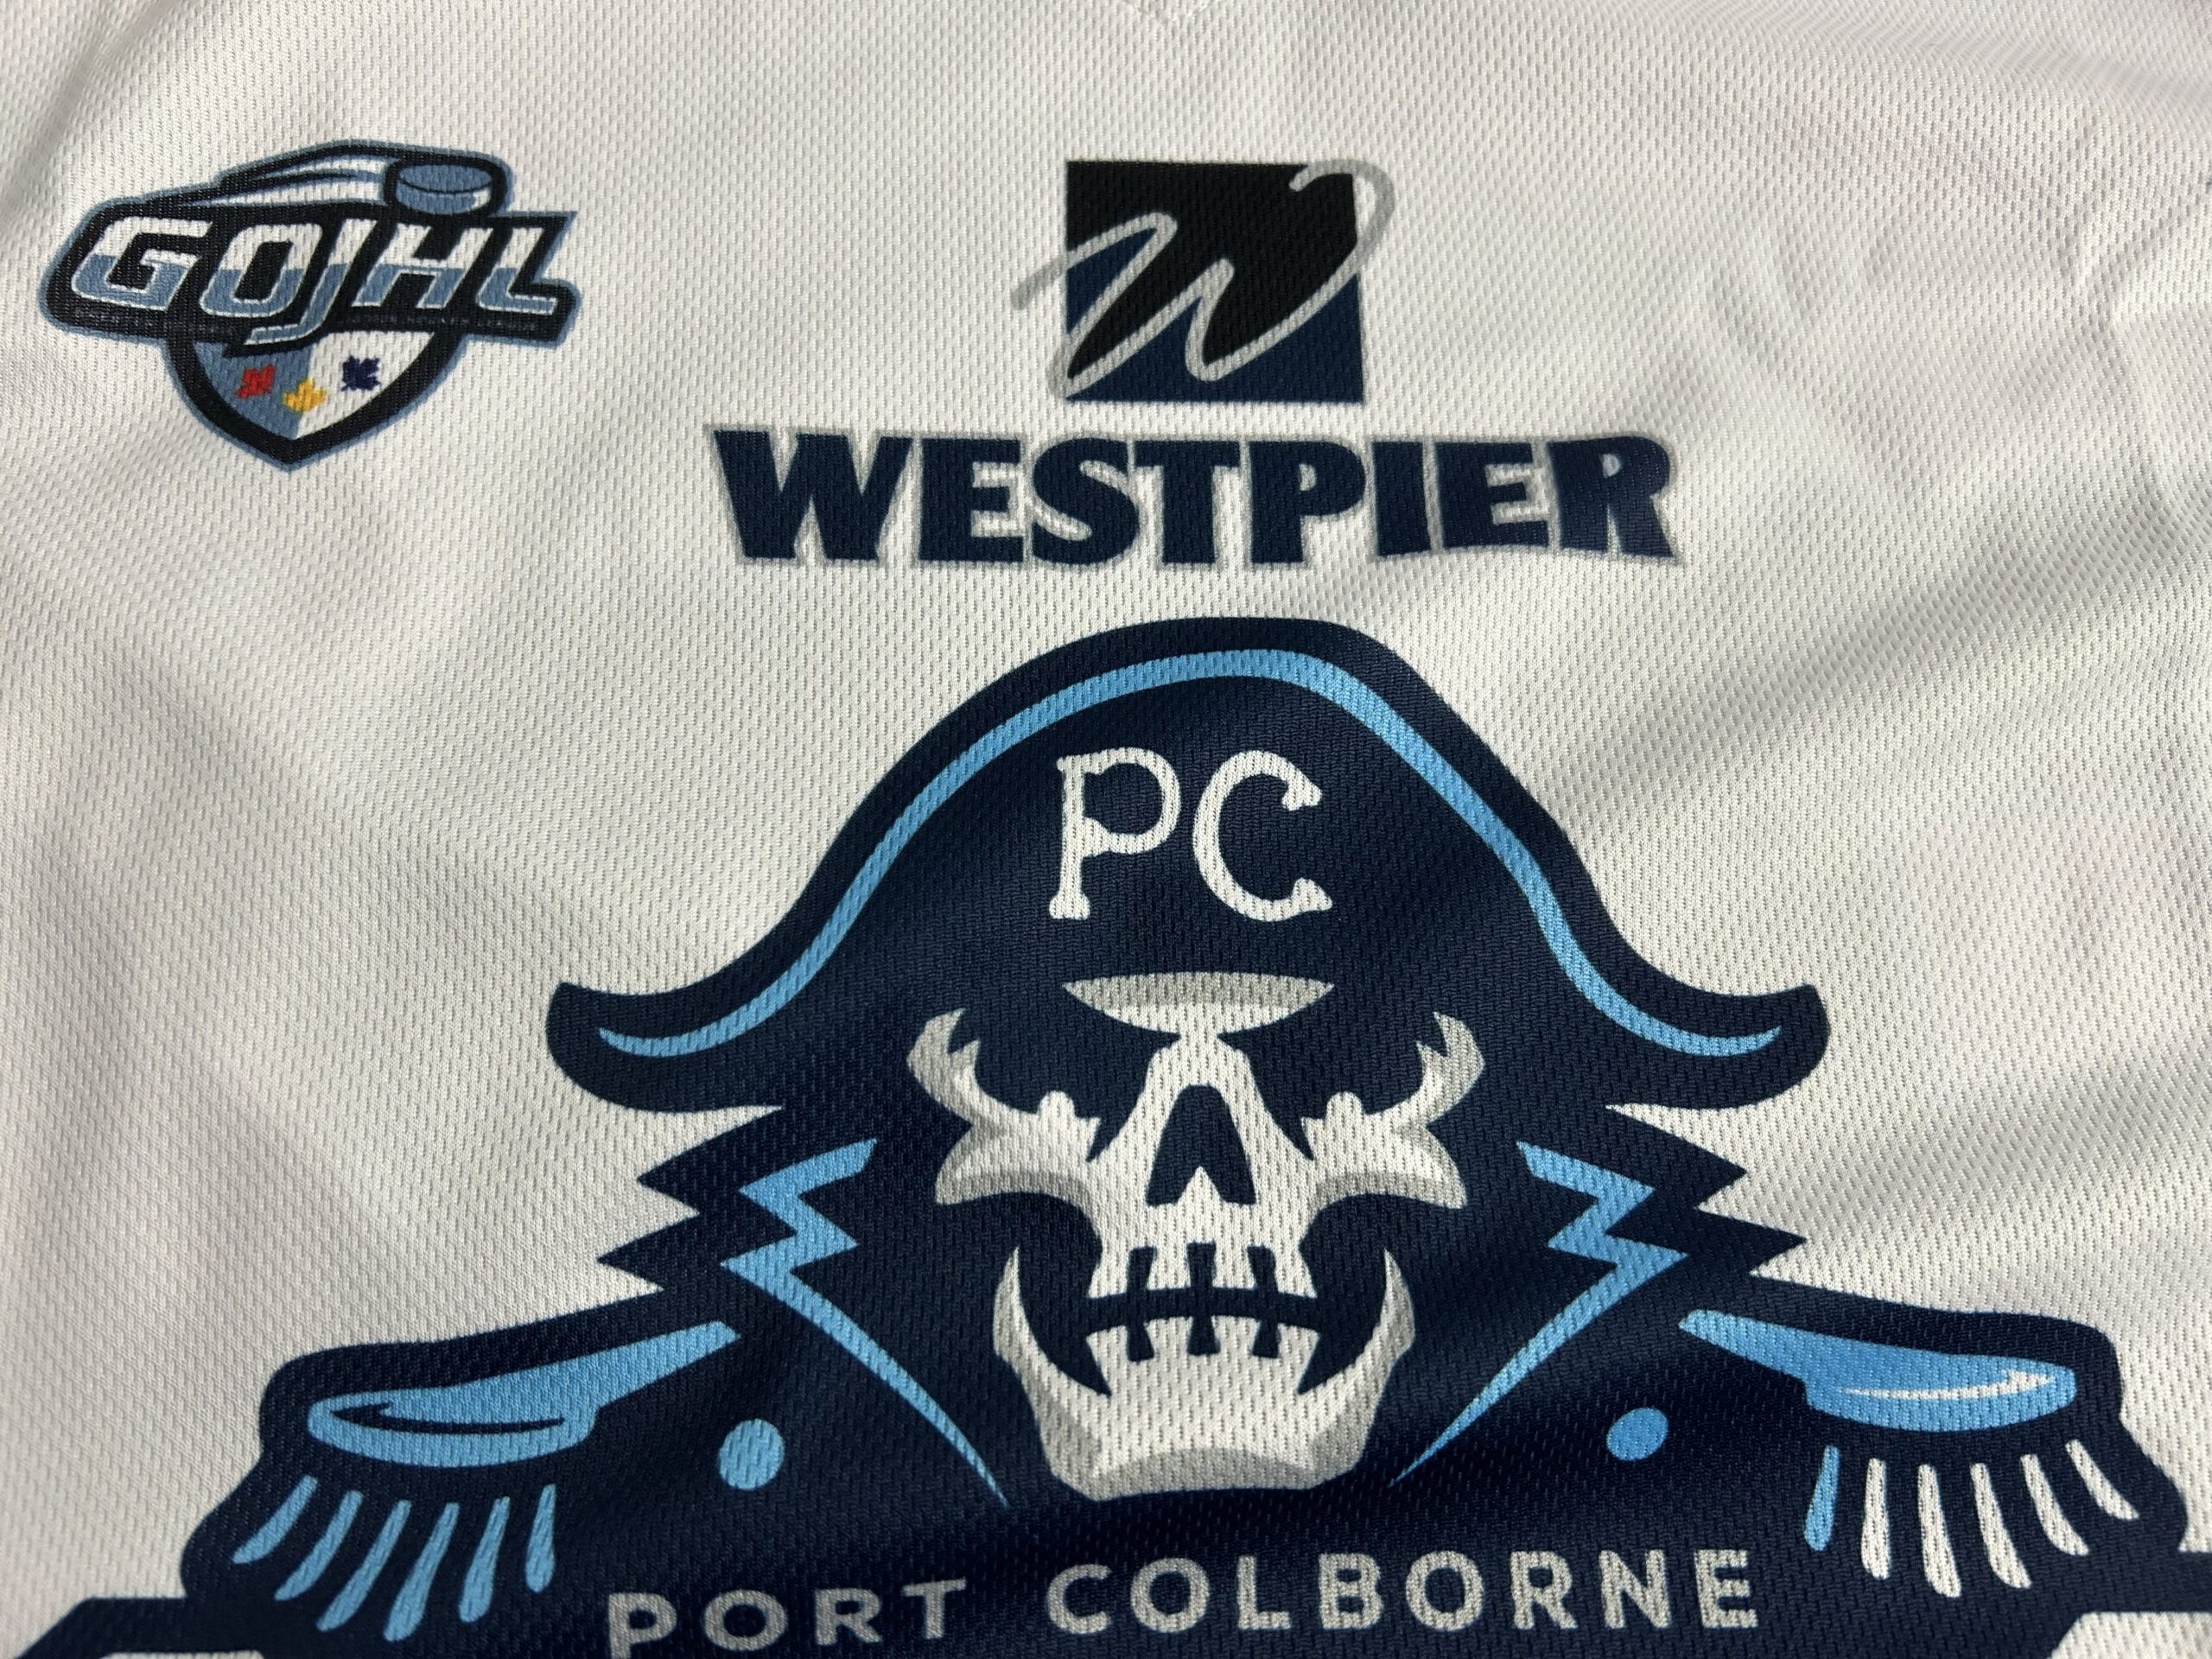 Sailors set for jersey giveaway